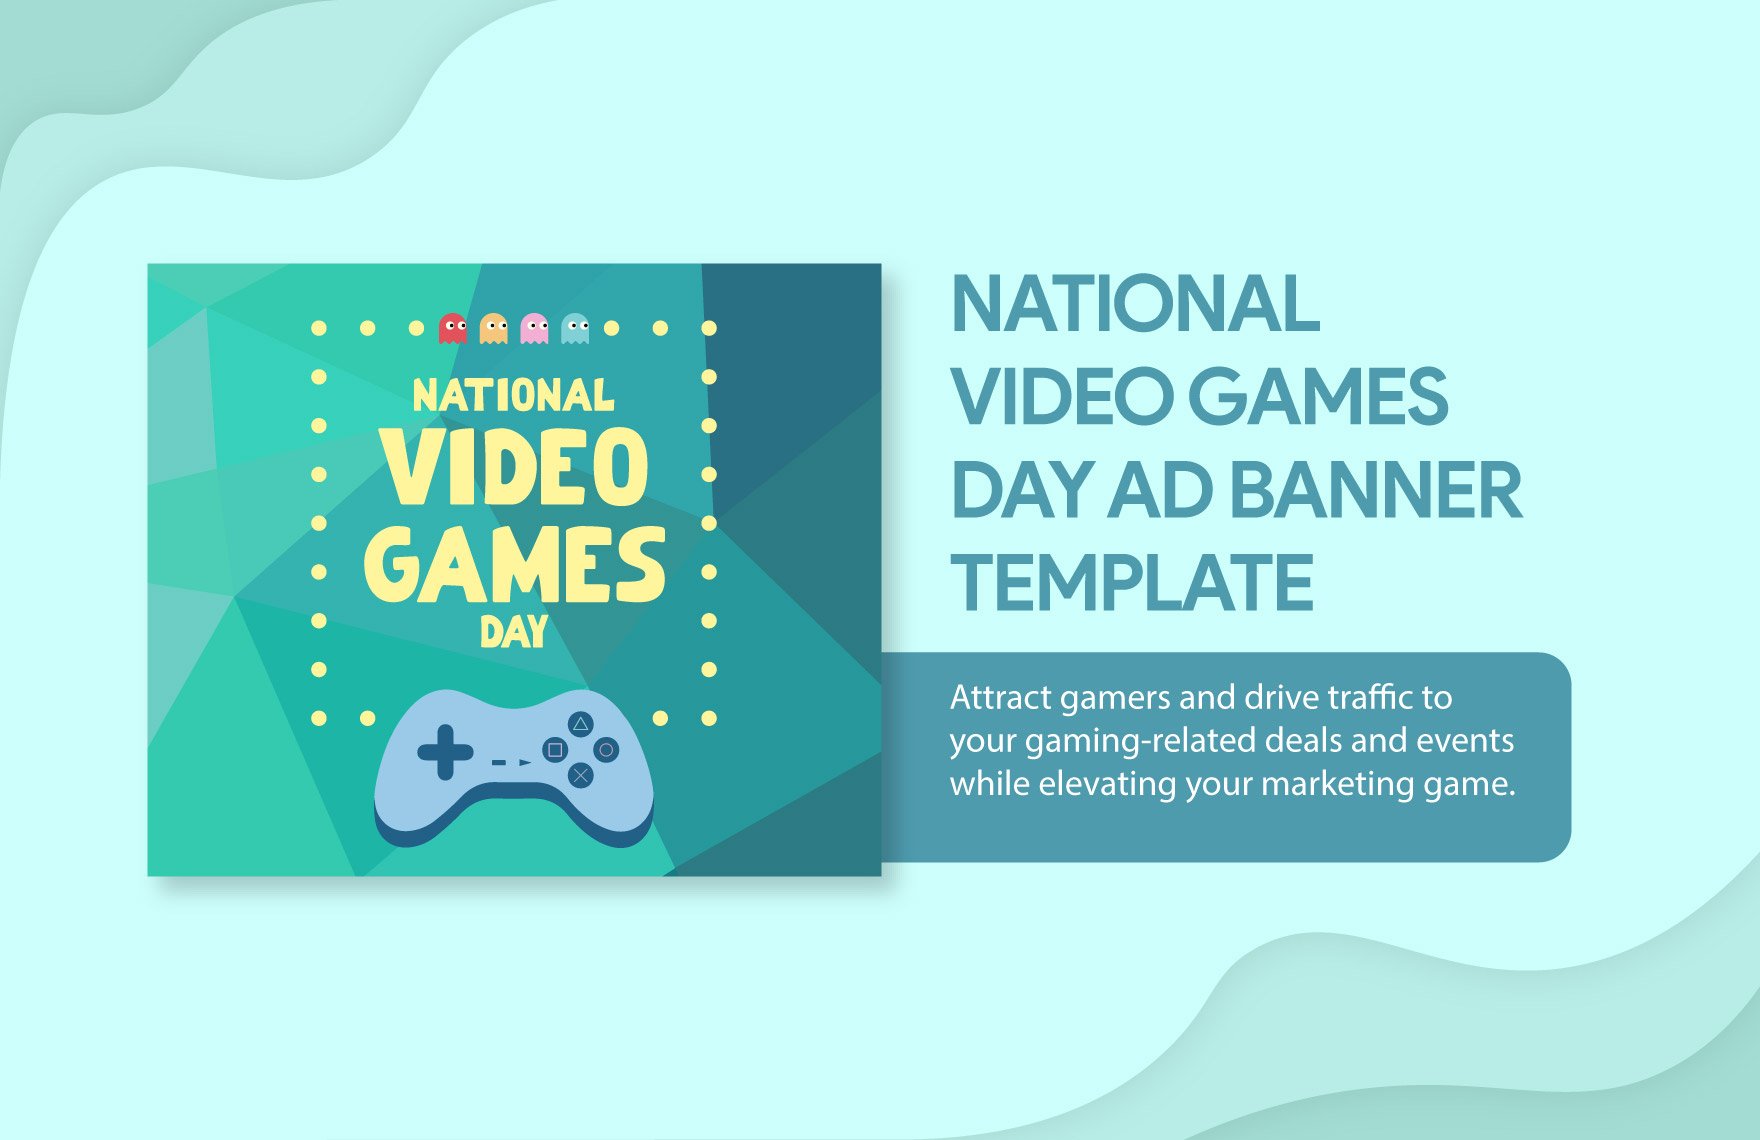 Free National Video Games Day Ad Banner Template in Illustrator, PSD, PNG